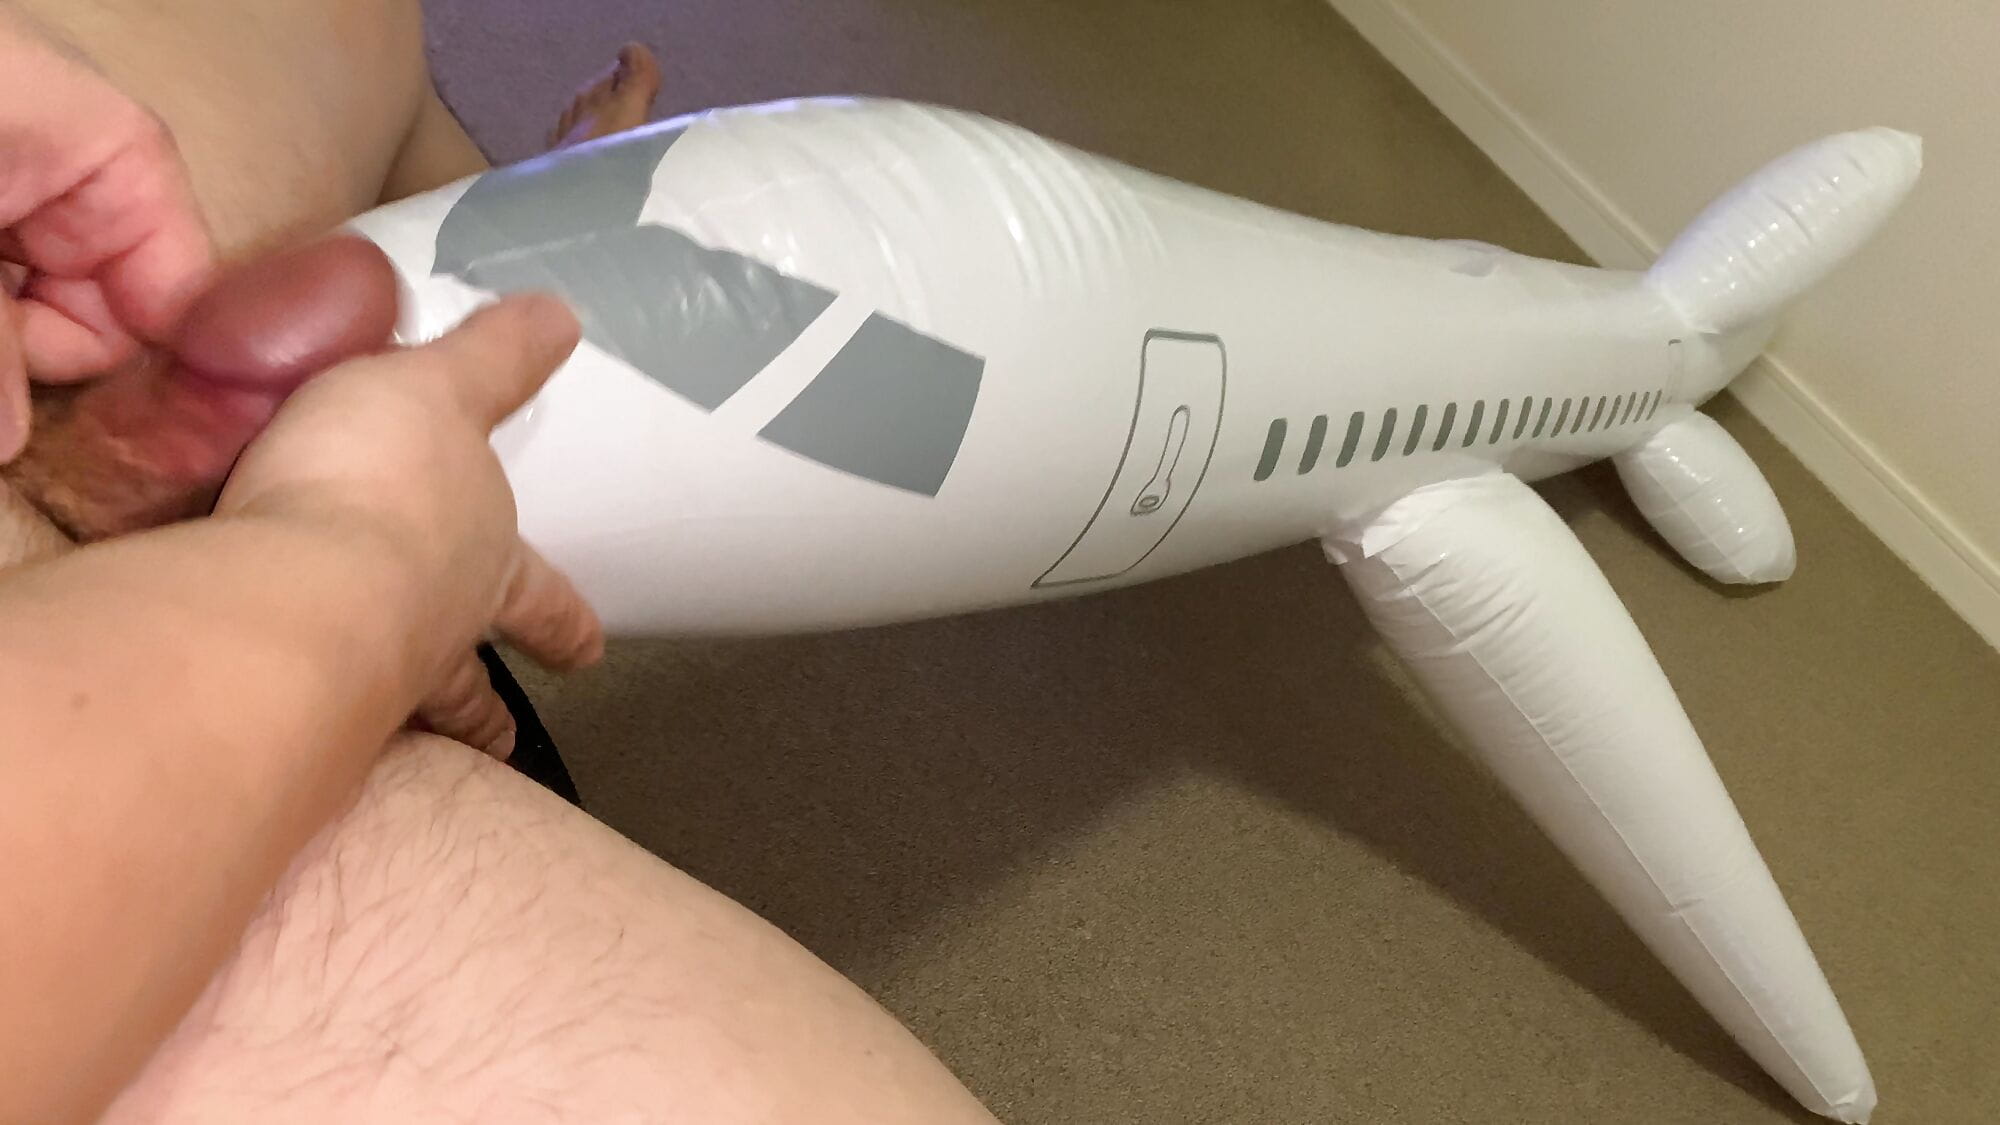 Small Penis Humping, Rubbing And Shooting A Load On An Inflatable Airplane - Airplane Blowjob